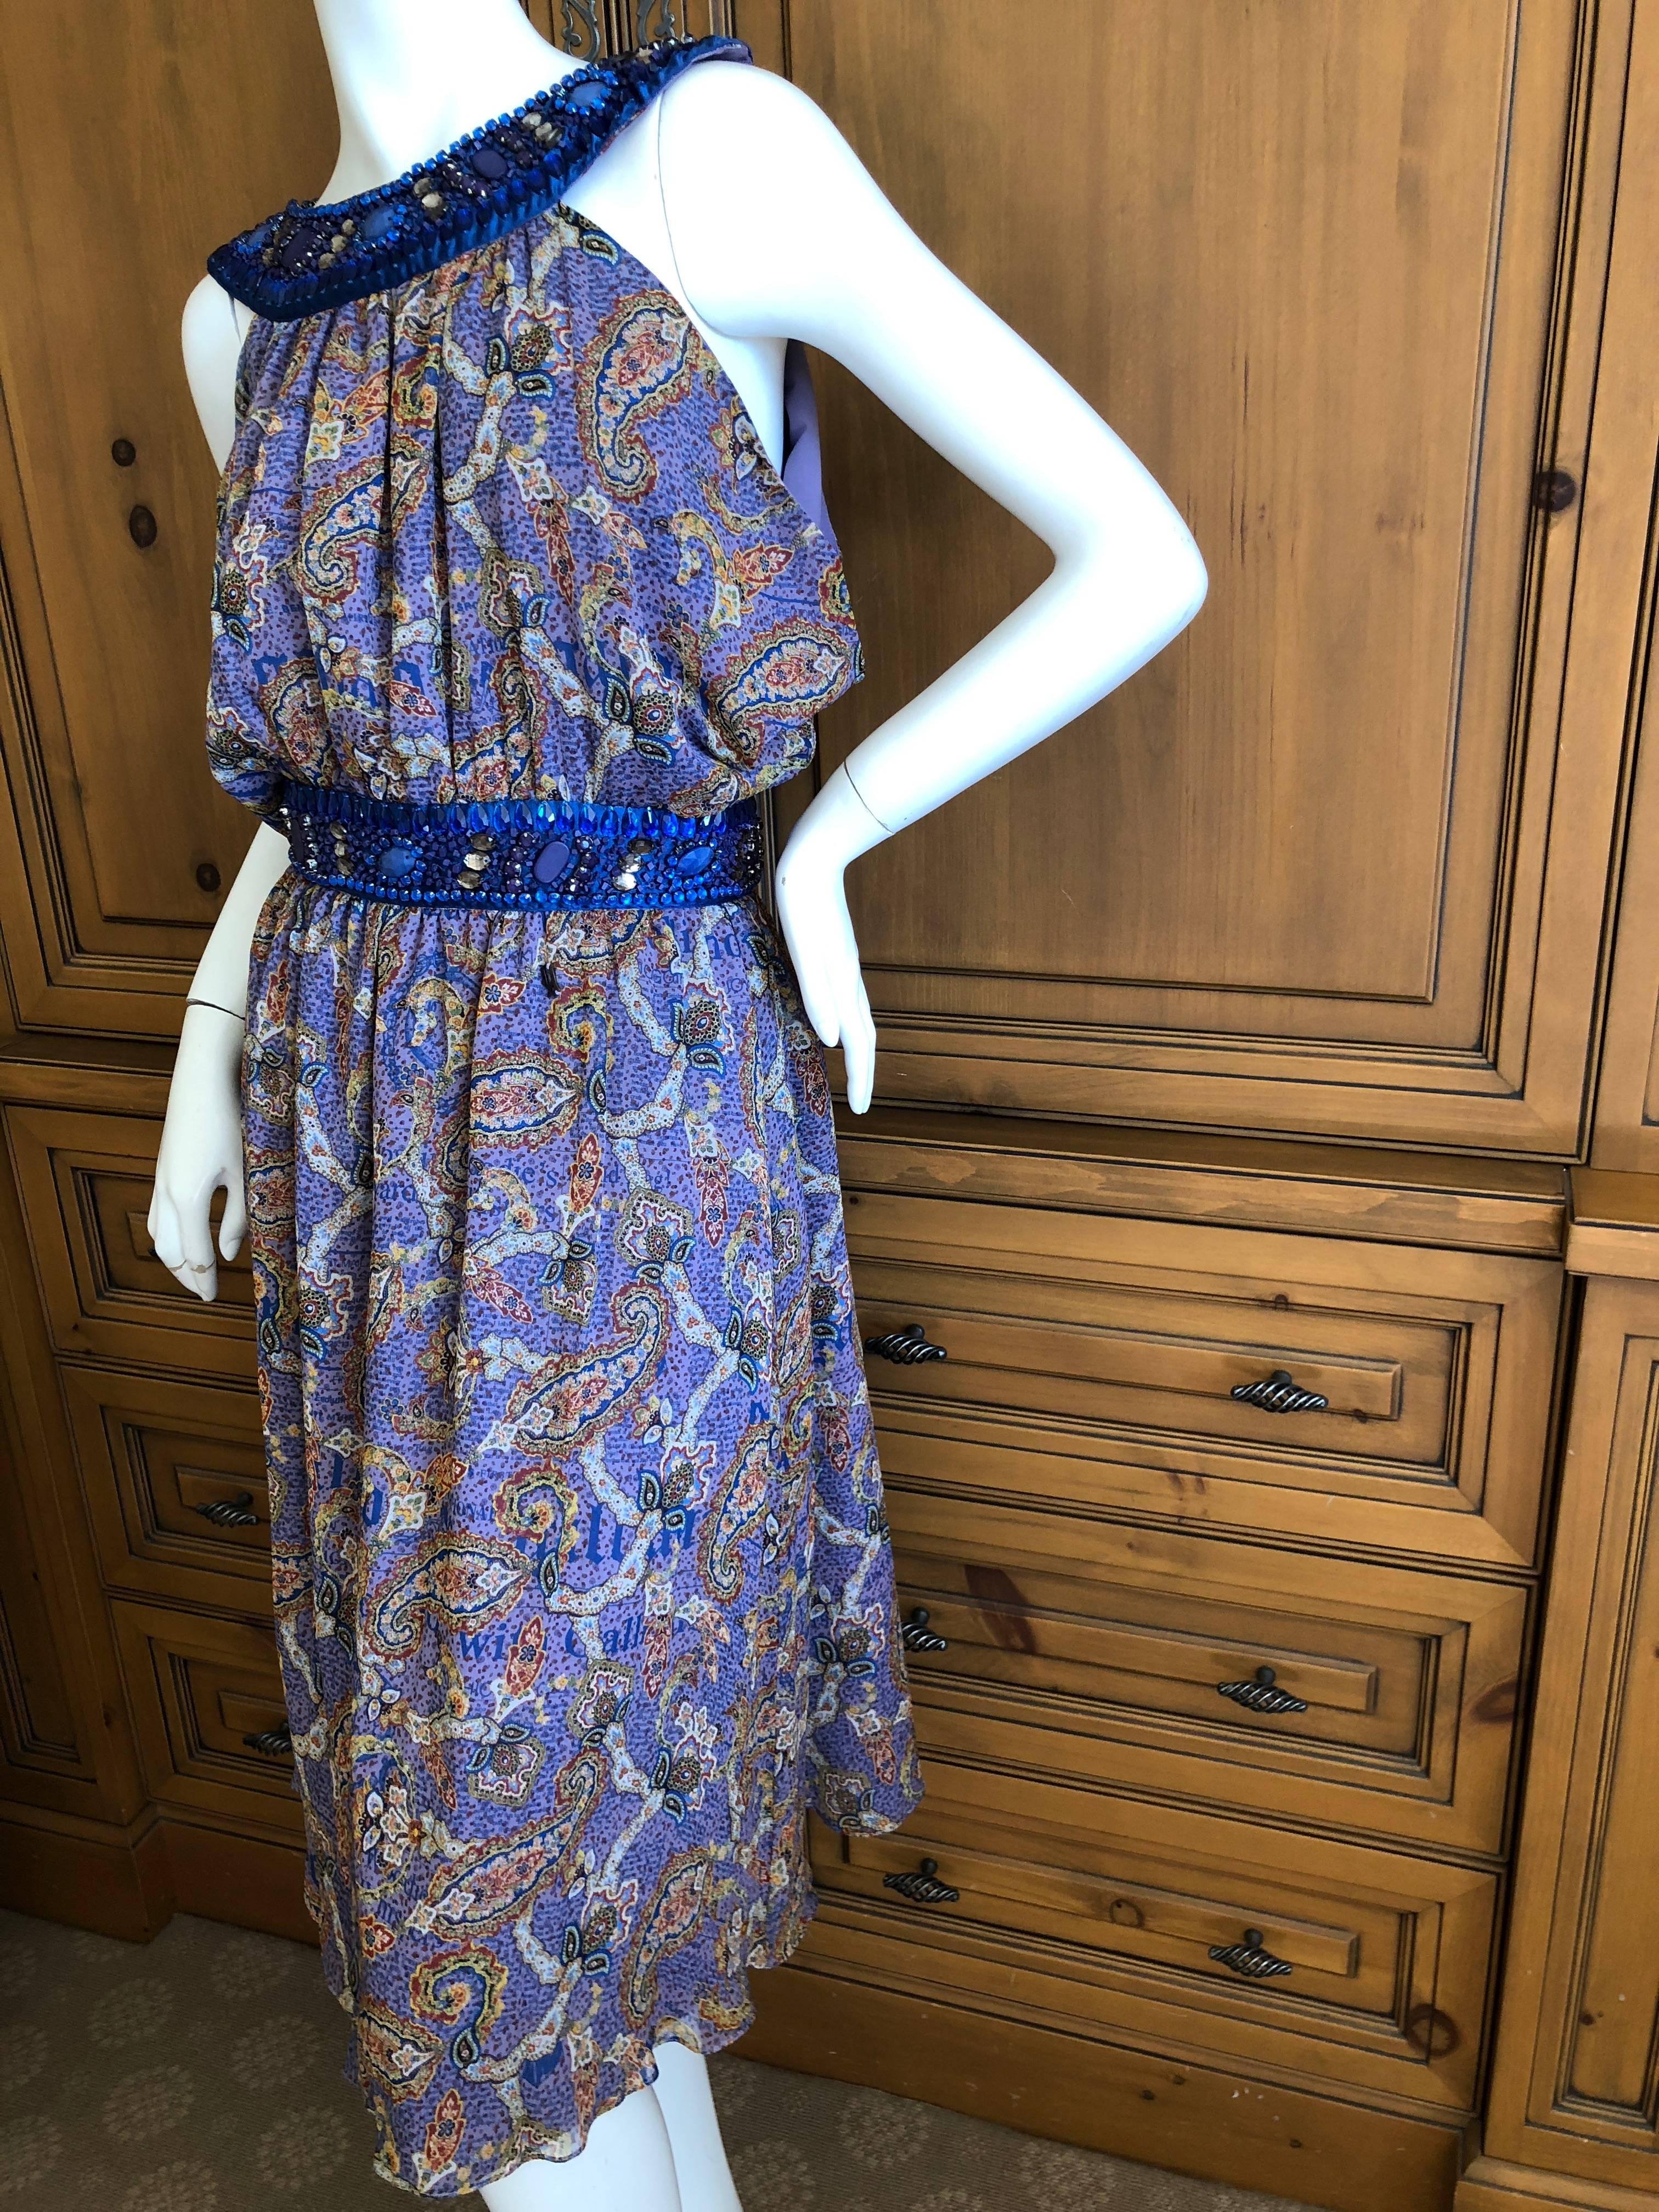 John Galliano Exquisite Jewel Embellished Silk Paisley Dress NWT In New Condition For Sale In Cloverdale, CA